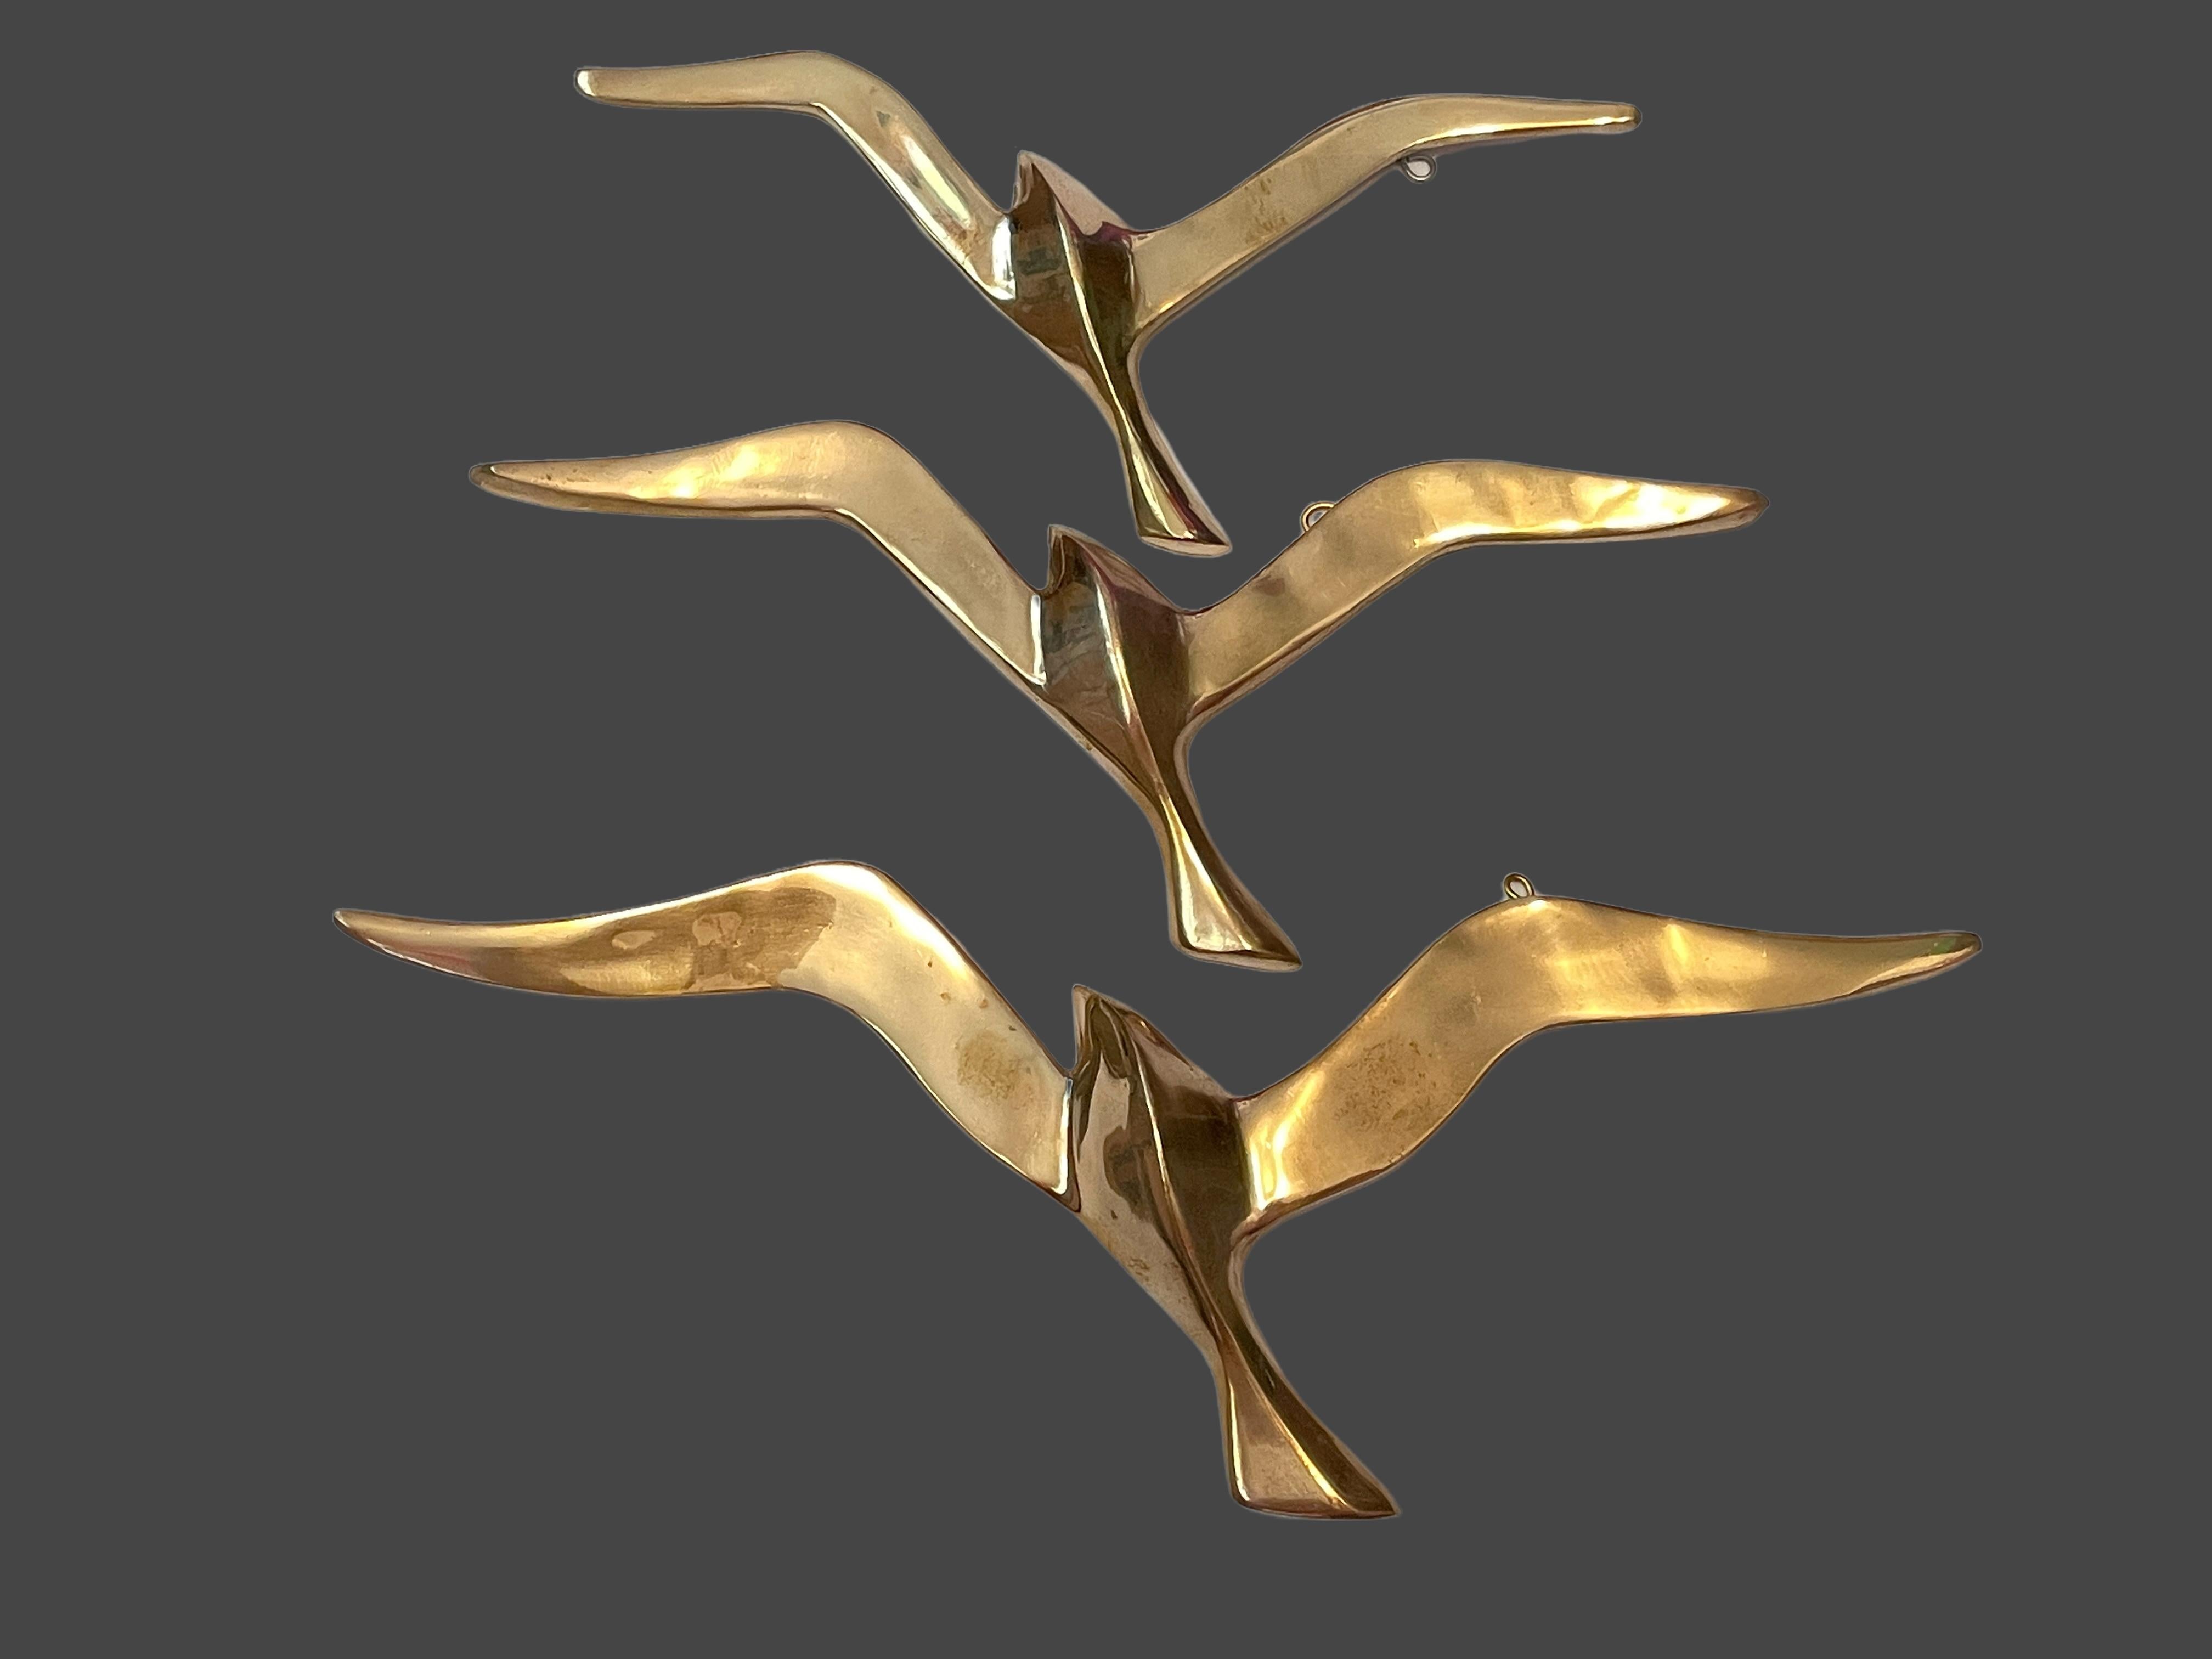 A set of three beautiful vintage brass flying swallow wall decorations. Each would make a beautiful ornament on a wall. They are with some patina and are an excellent craftsmanship. Made in the 1960s it displays the joy of that great era with a